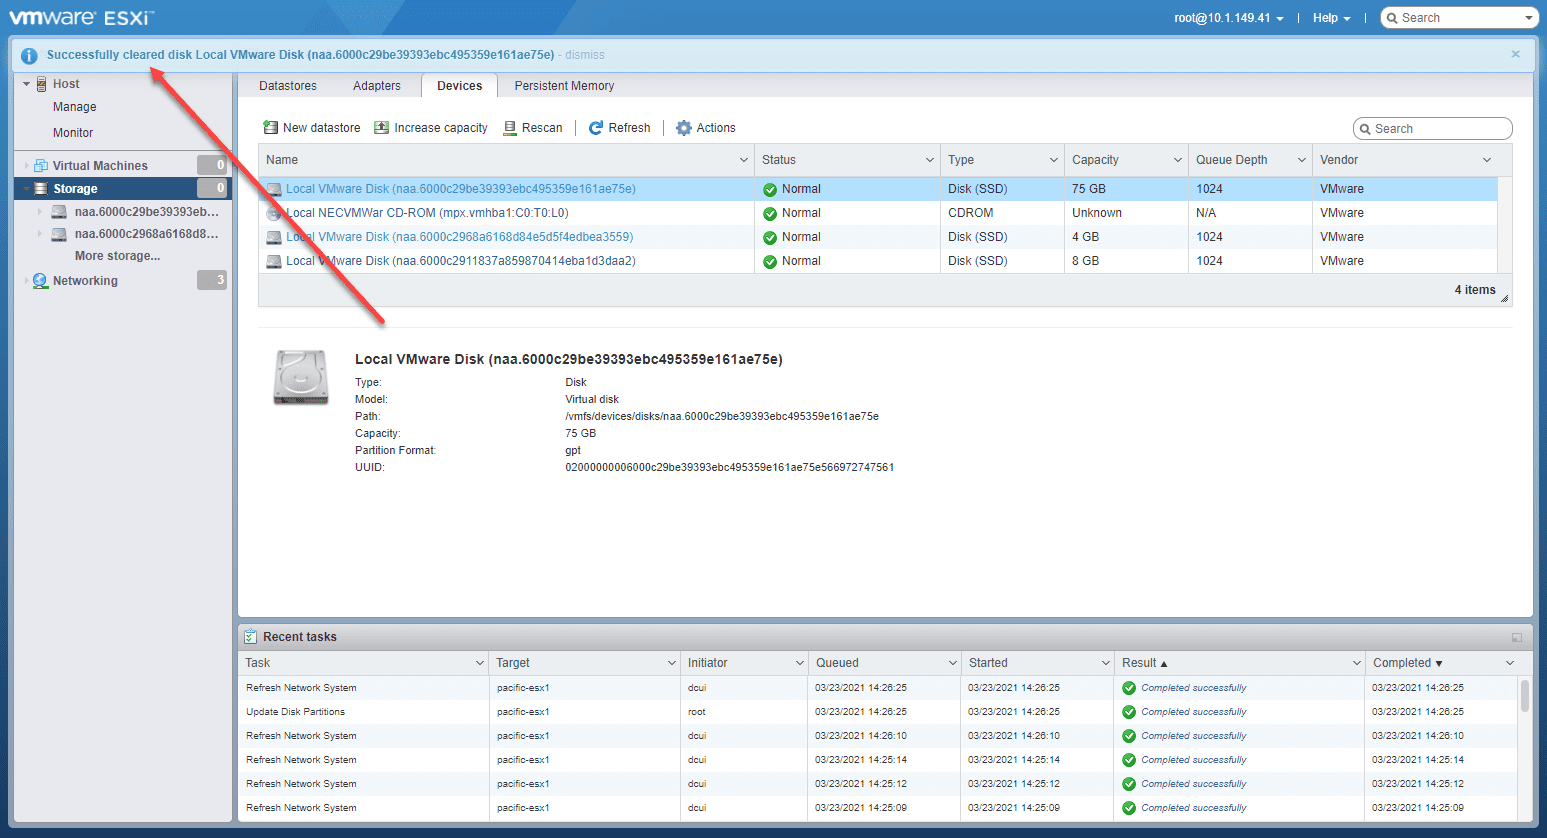 Clearing the partitions on the esxi host is now successful